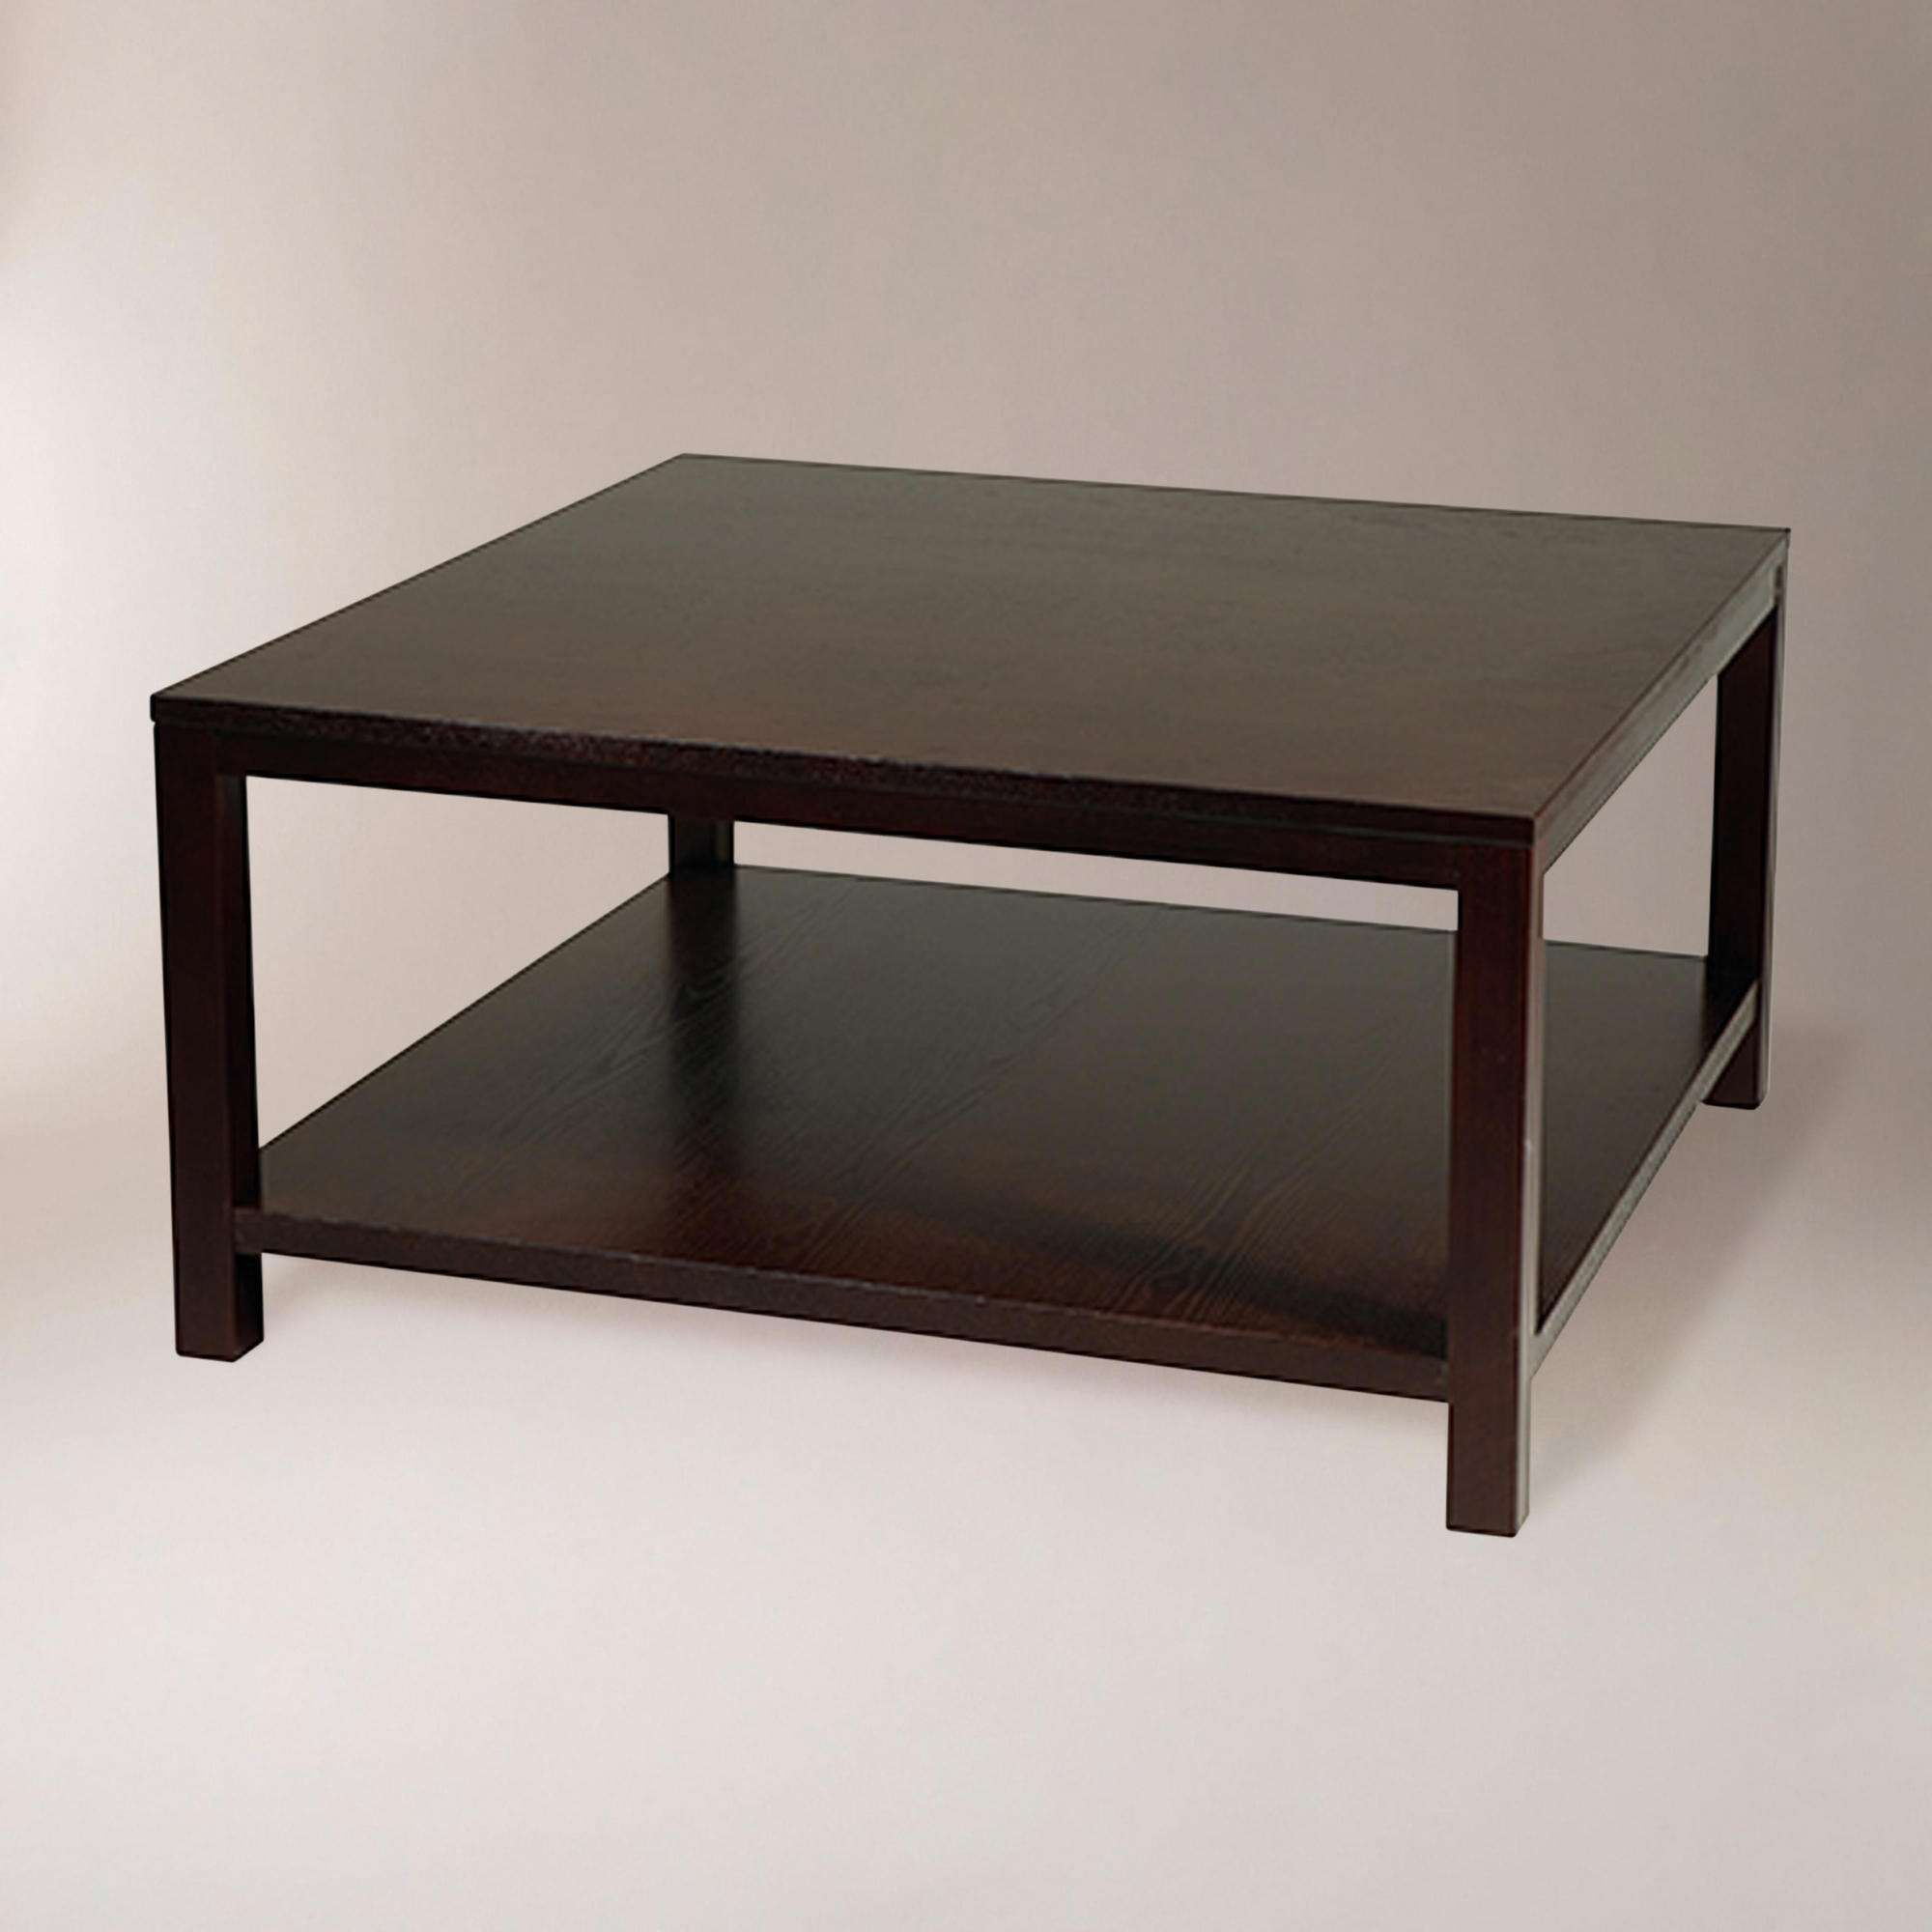 Coffee Tables : Brown Wood Modern Square Coffee Table Ideas White In Most Recent Square Black Coffee Tables (View 5 of 20)